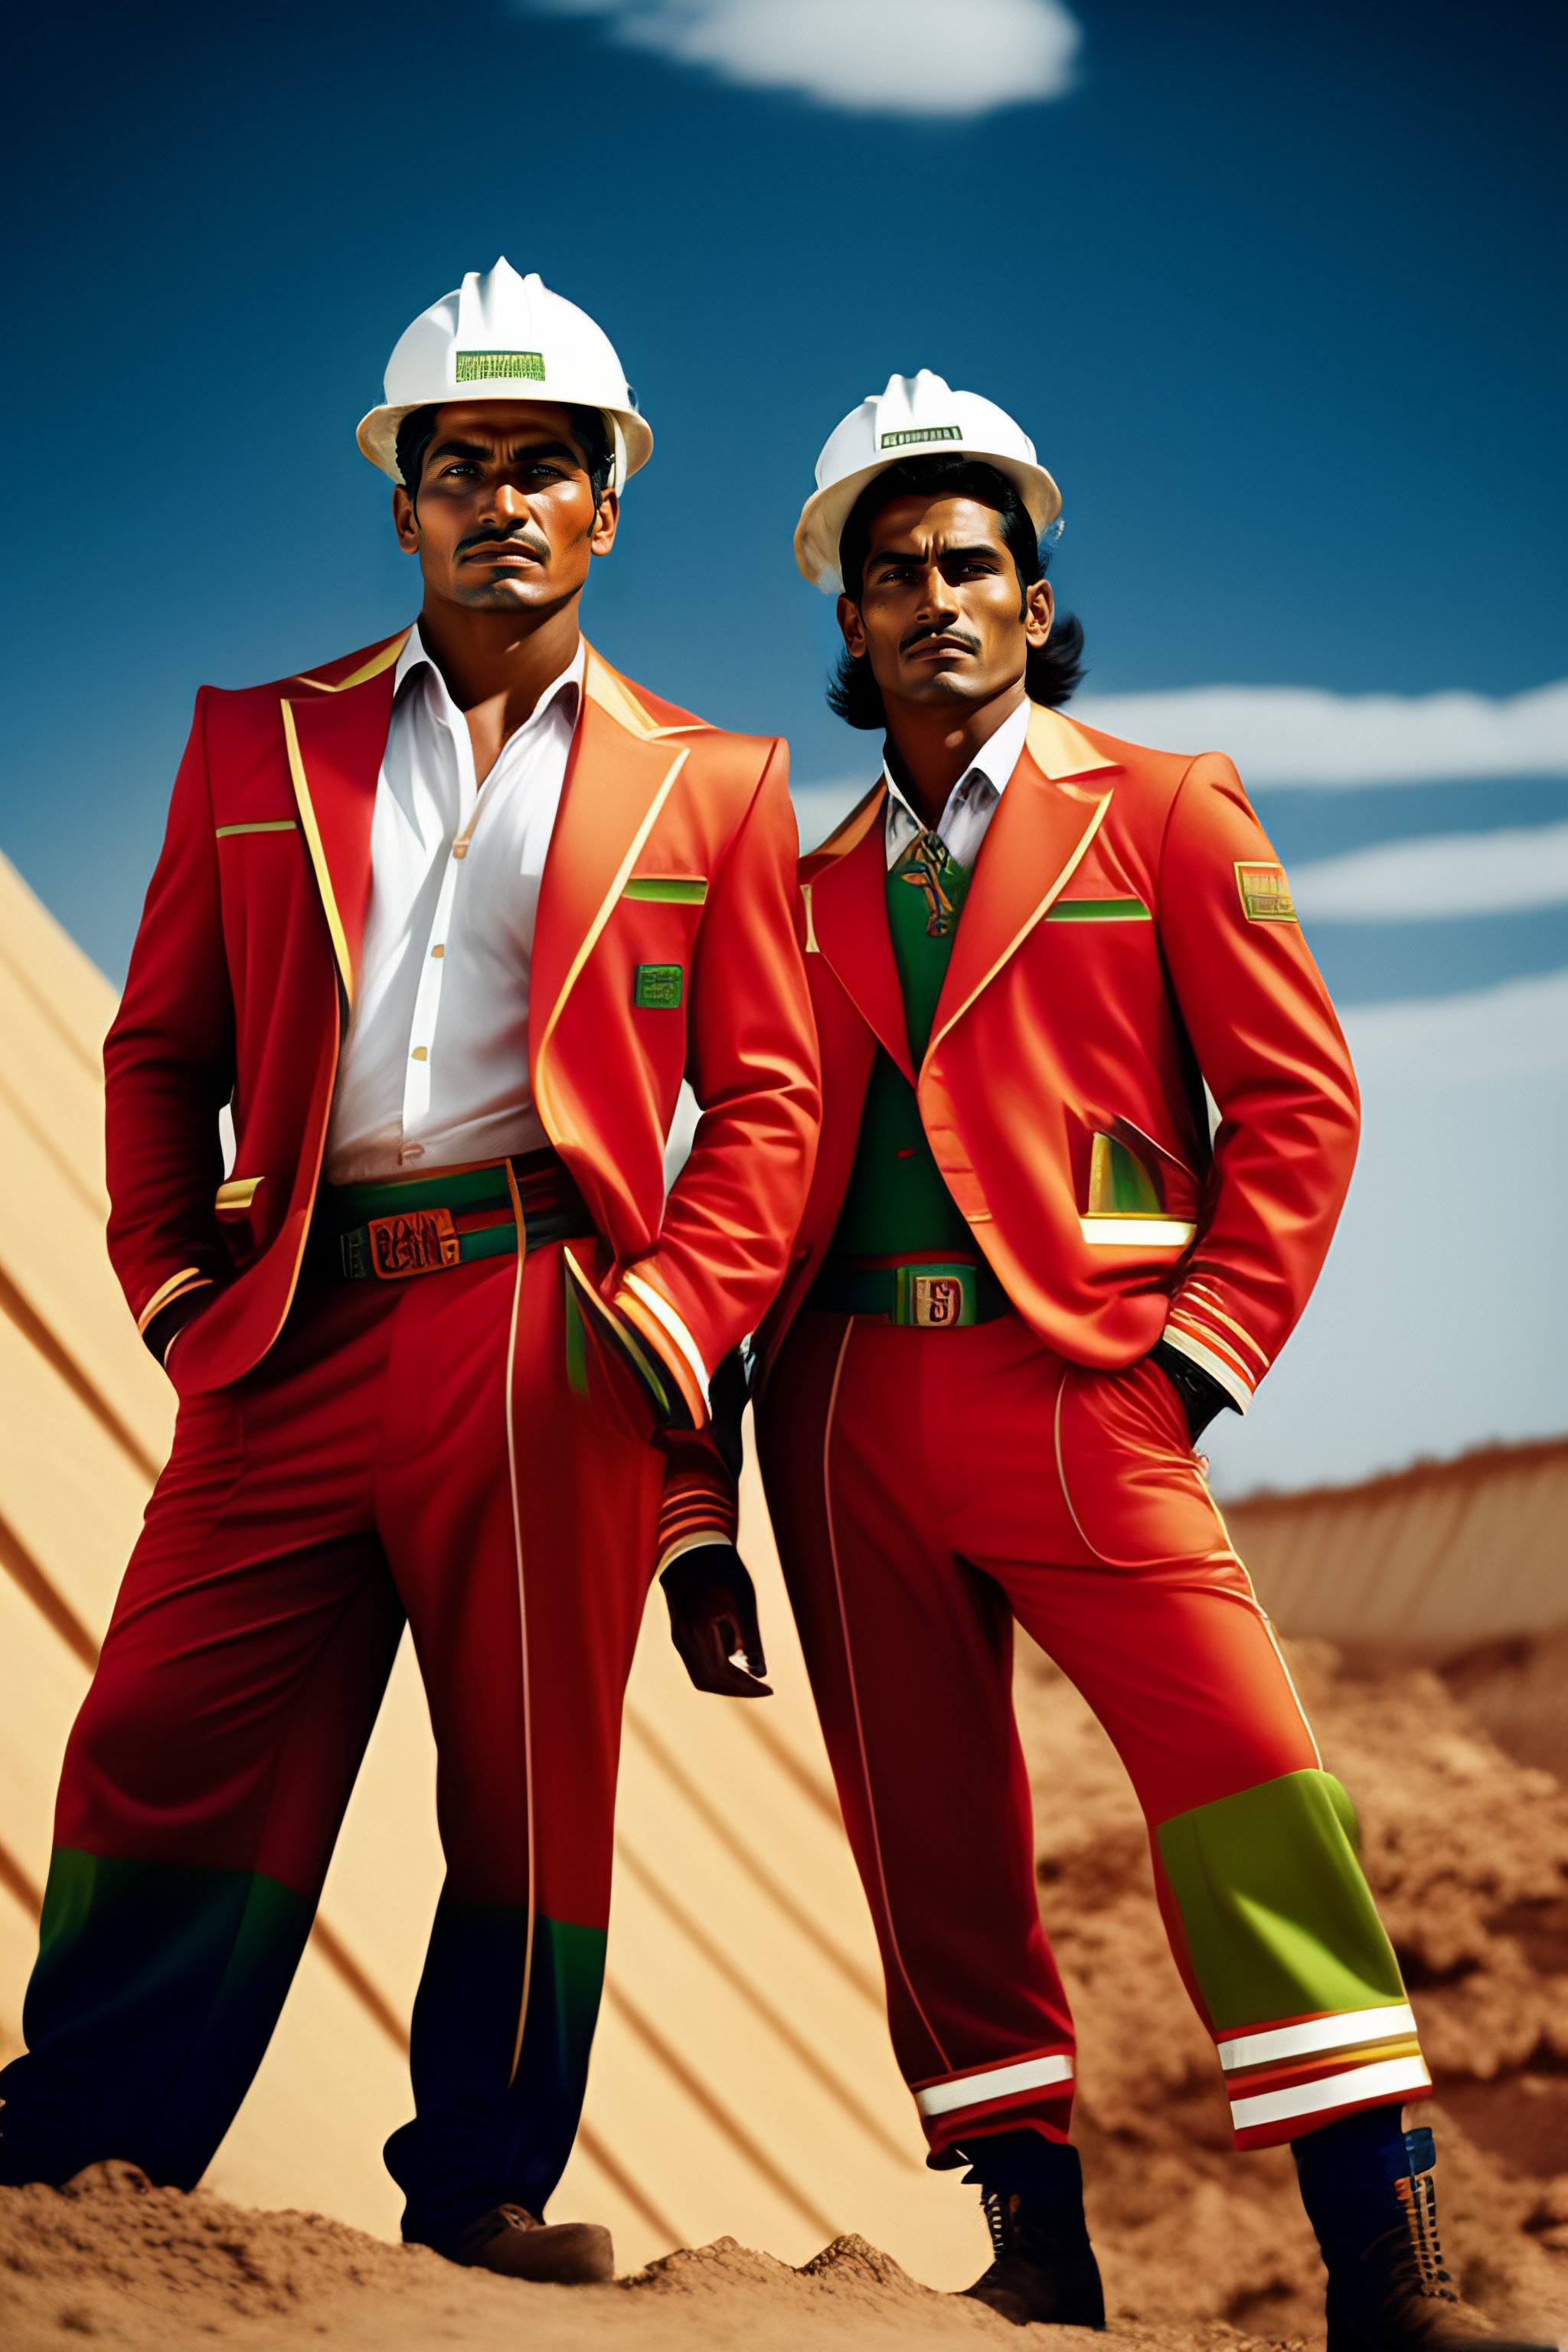 Lexica - Portrait of mexican construction workers on job site in ((gucci  suits)) EPIC photoshoot by David LaChapelle. LOUNGING, editorial Fashion  Mag...